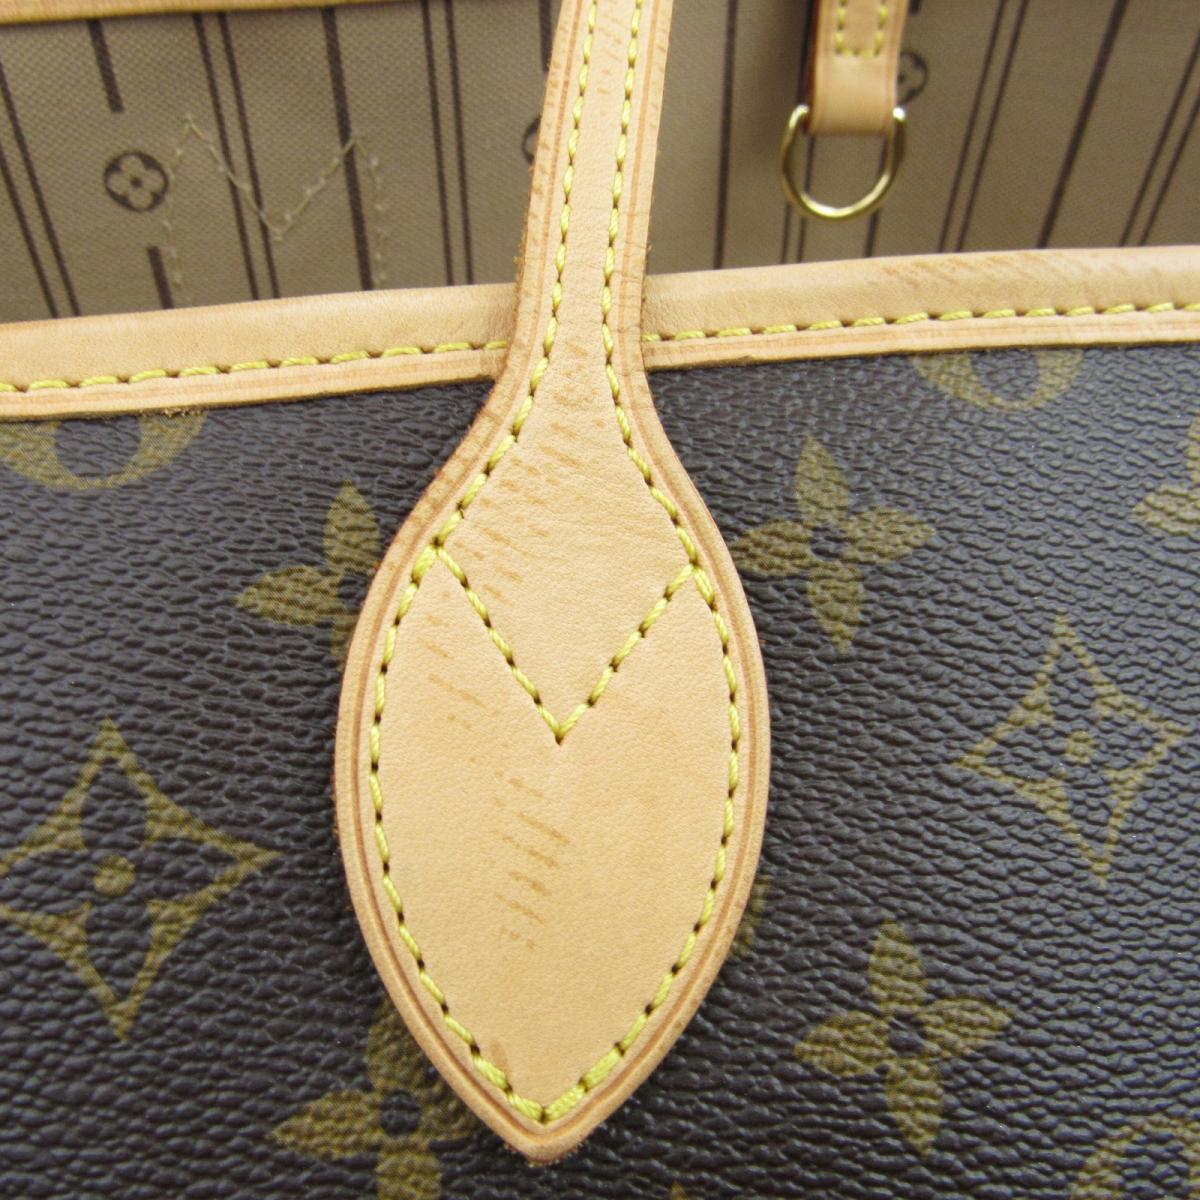 BRANDOFF GINZA: Auth LOUIS VUITTON Neverfull GM Shoulder Tote Bag M40157 Monogram Used Vintage ...